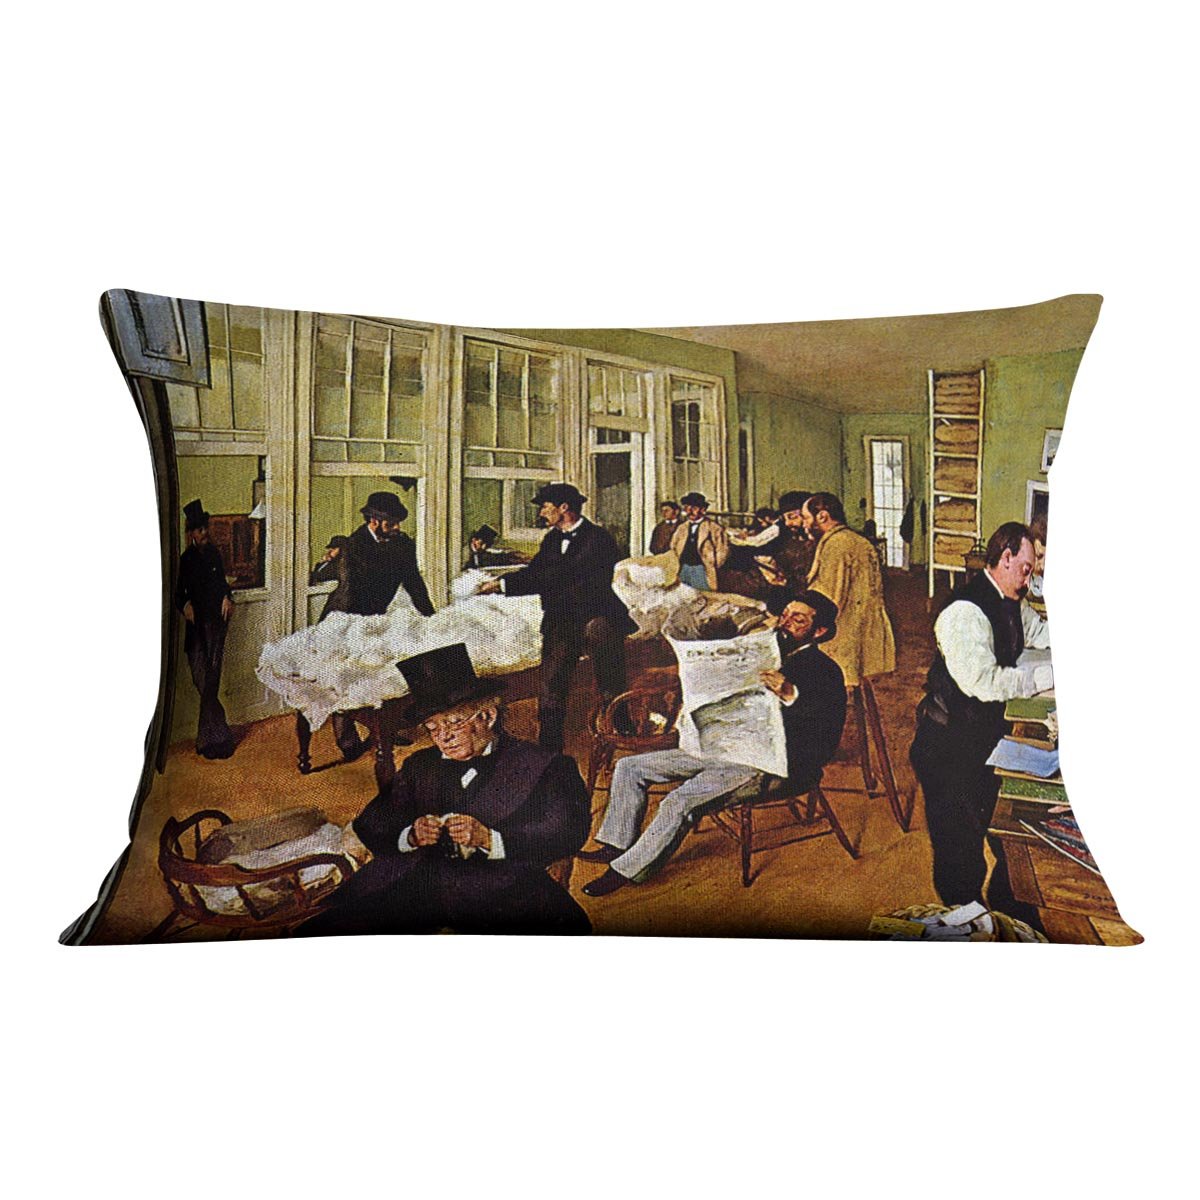 The cotton office in New Orleans by Degas Cushion